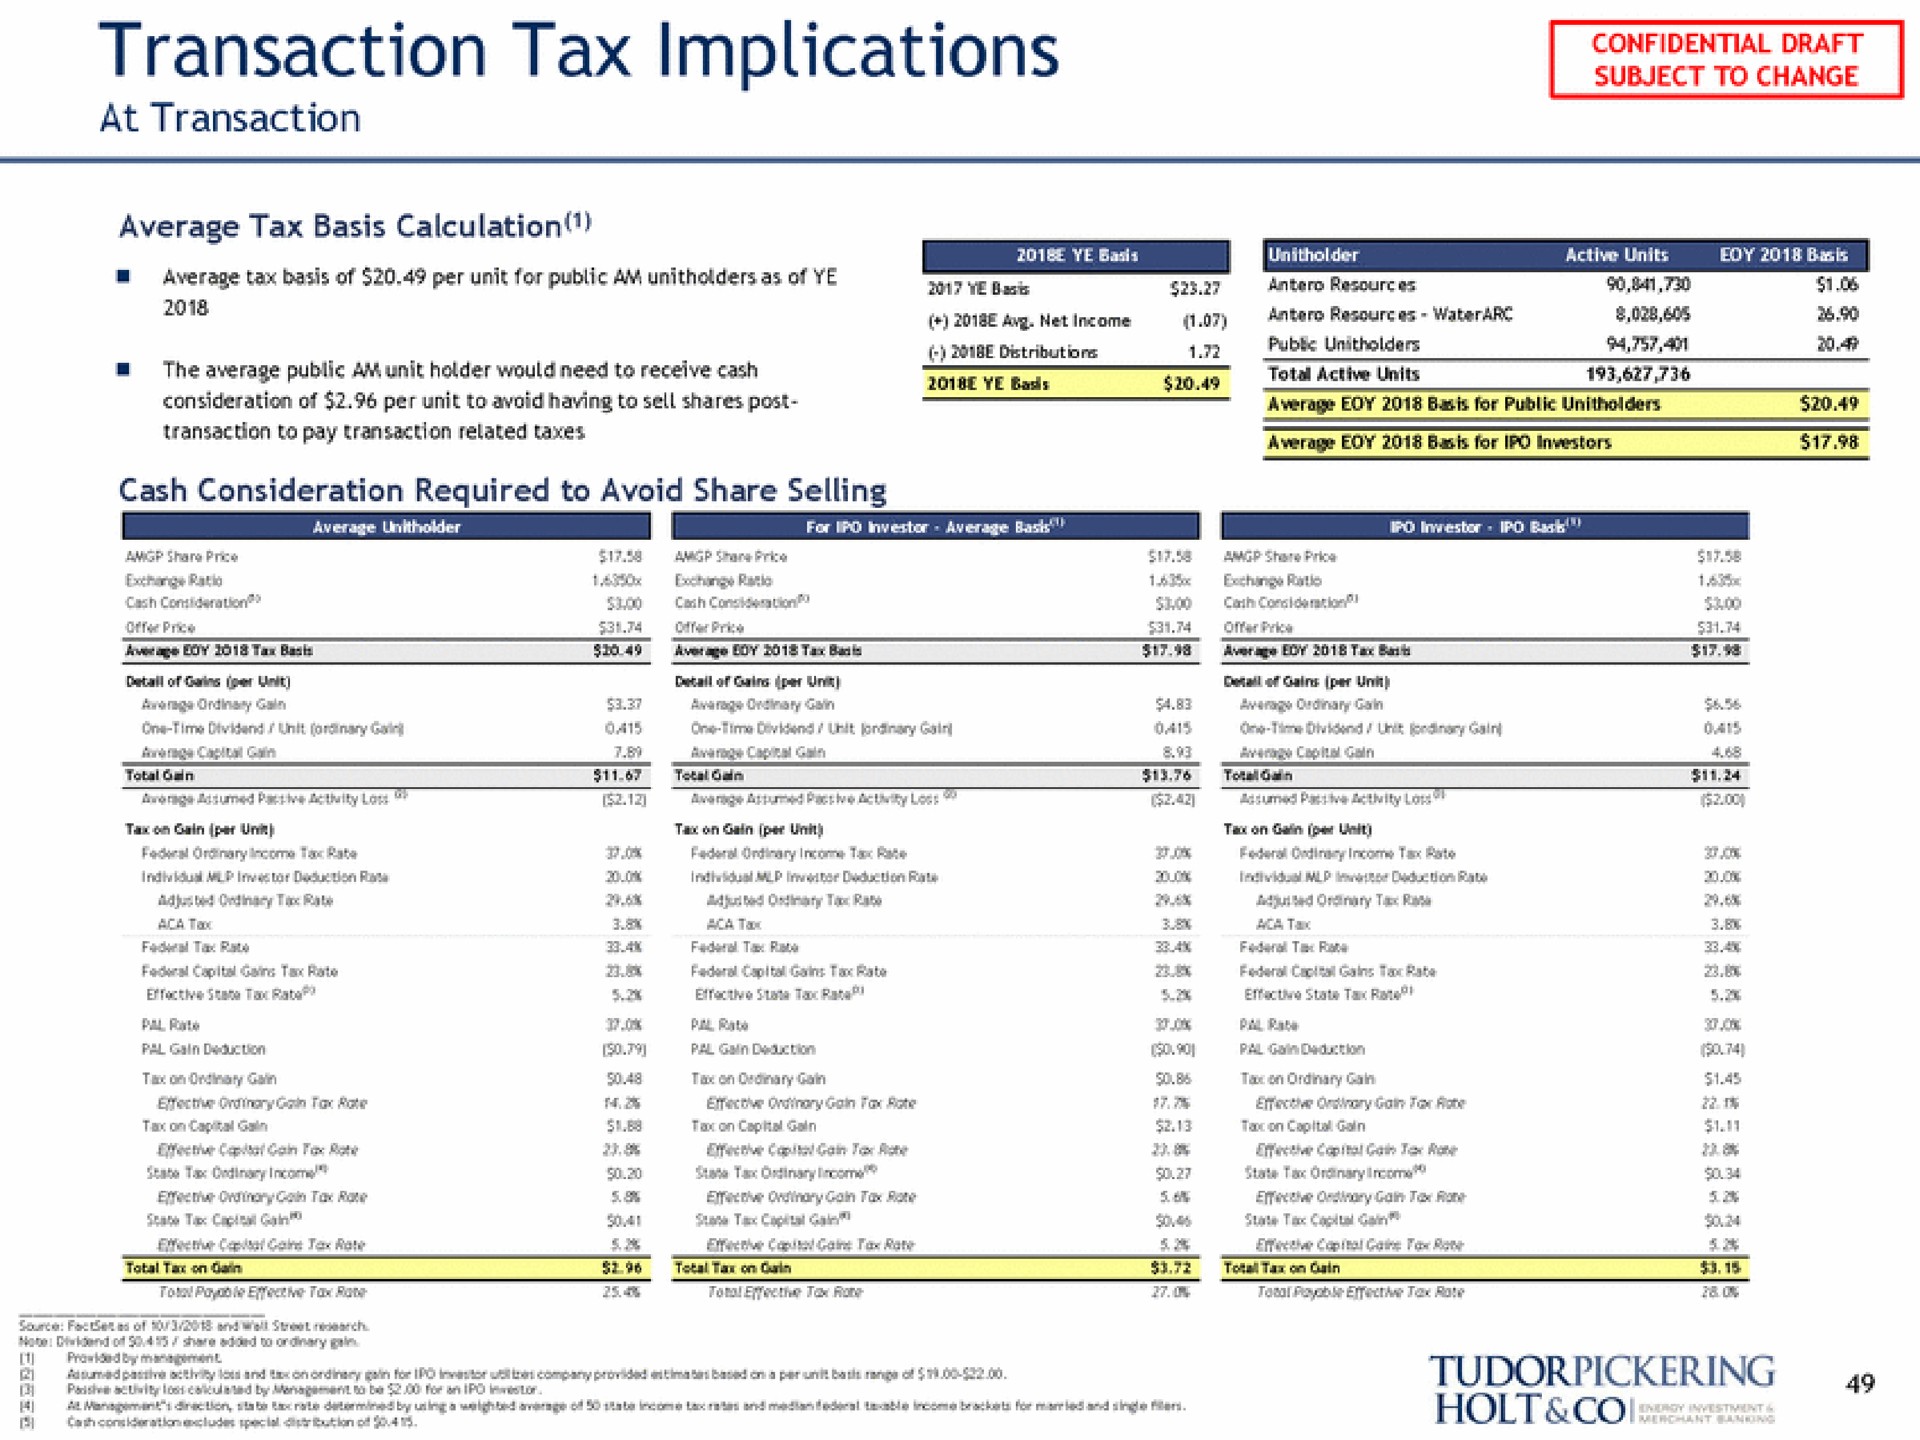 transaction tax implications subject to change | Tudor, Pickering, Holt & Co